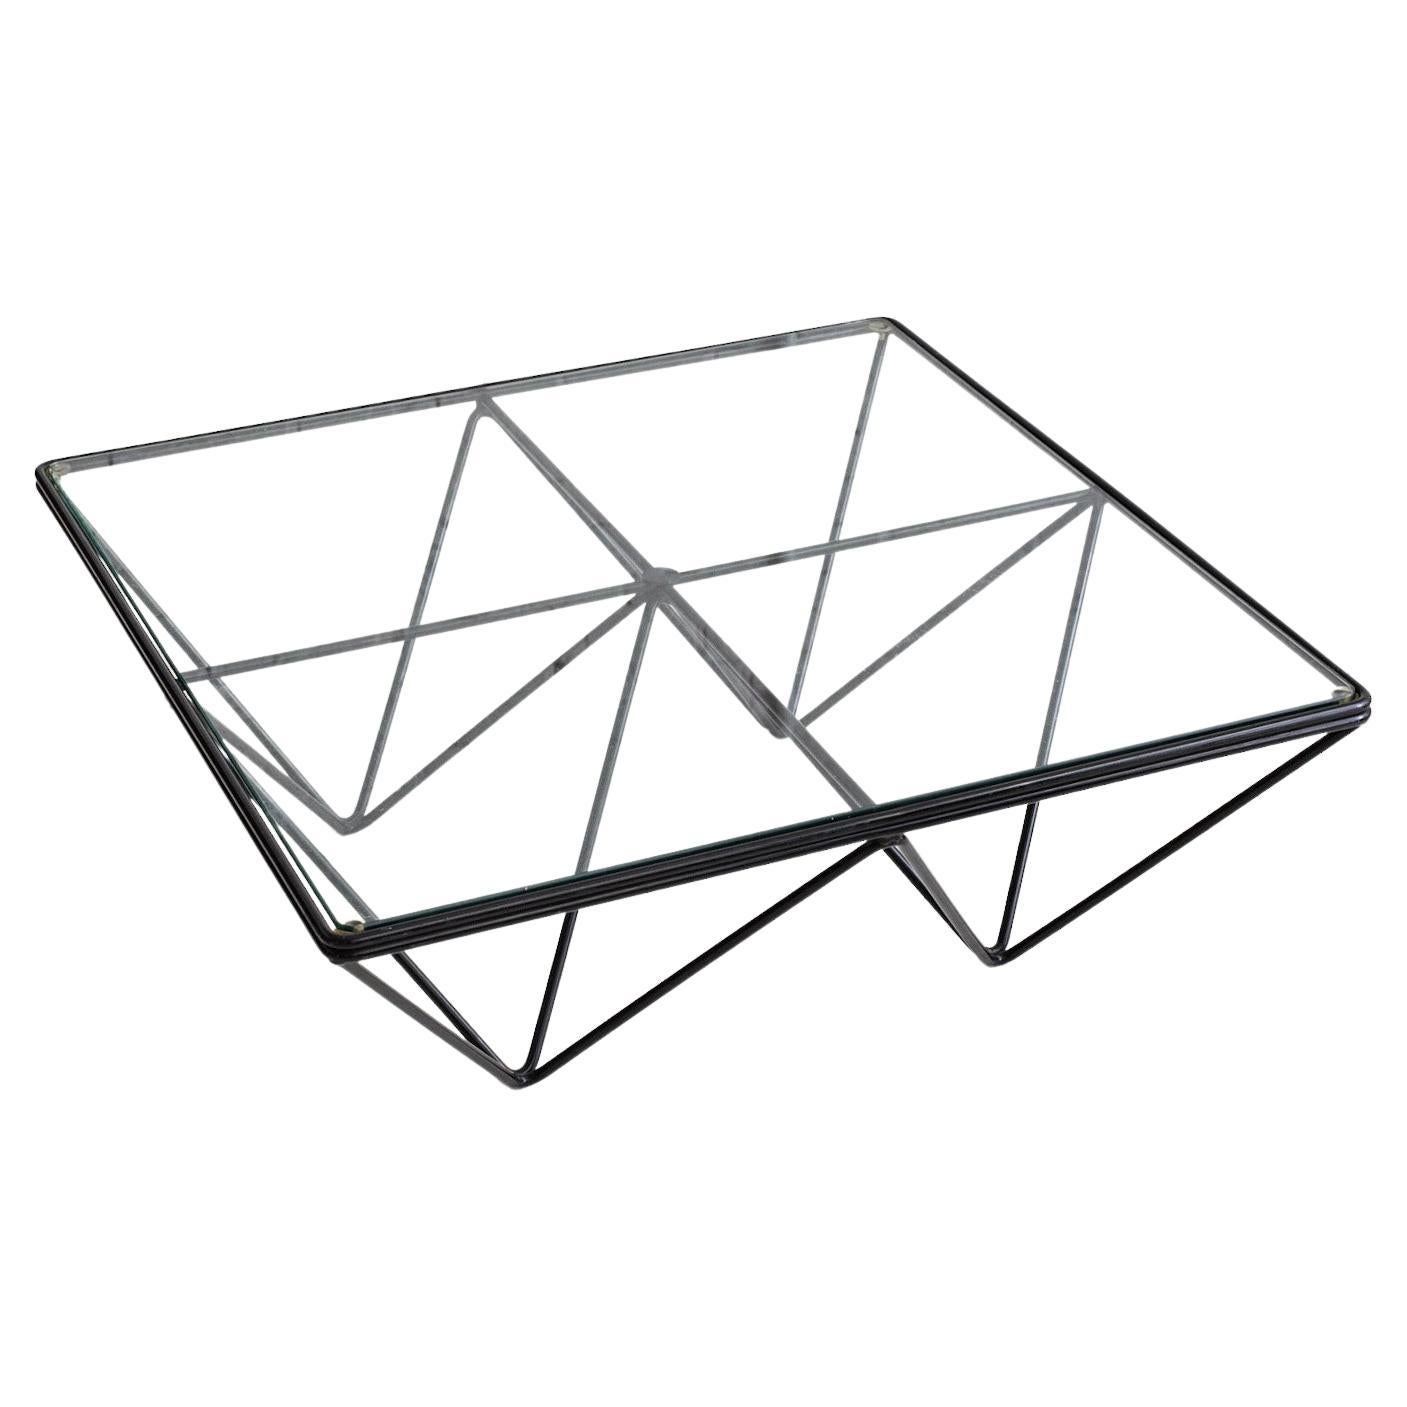 "Alanda" Steel and Glass Coffee Table by Paolo Piva for B&B Italia